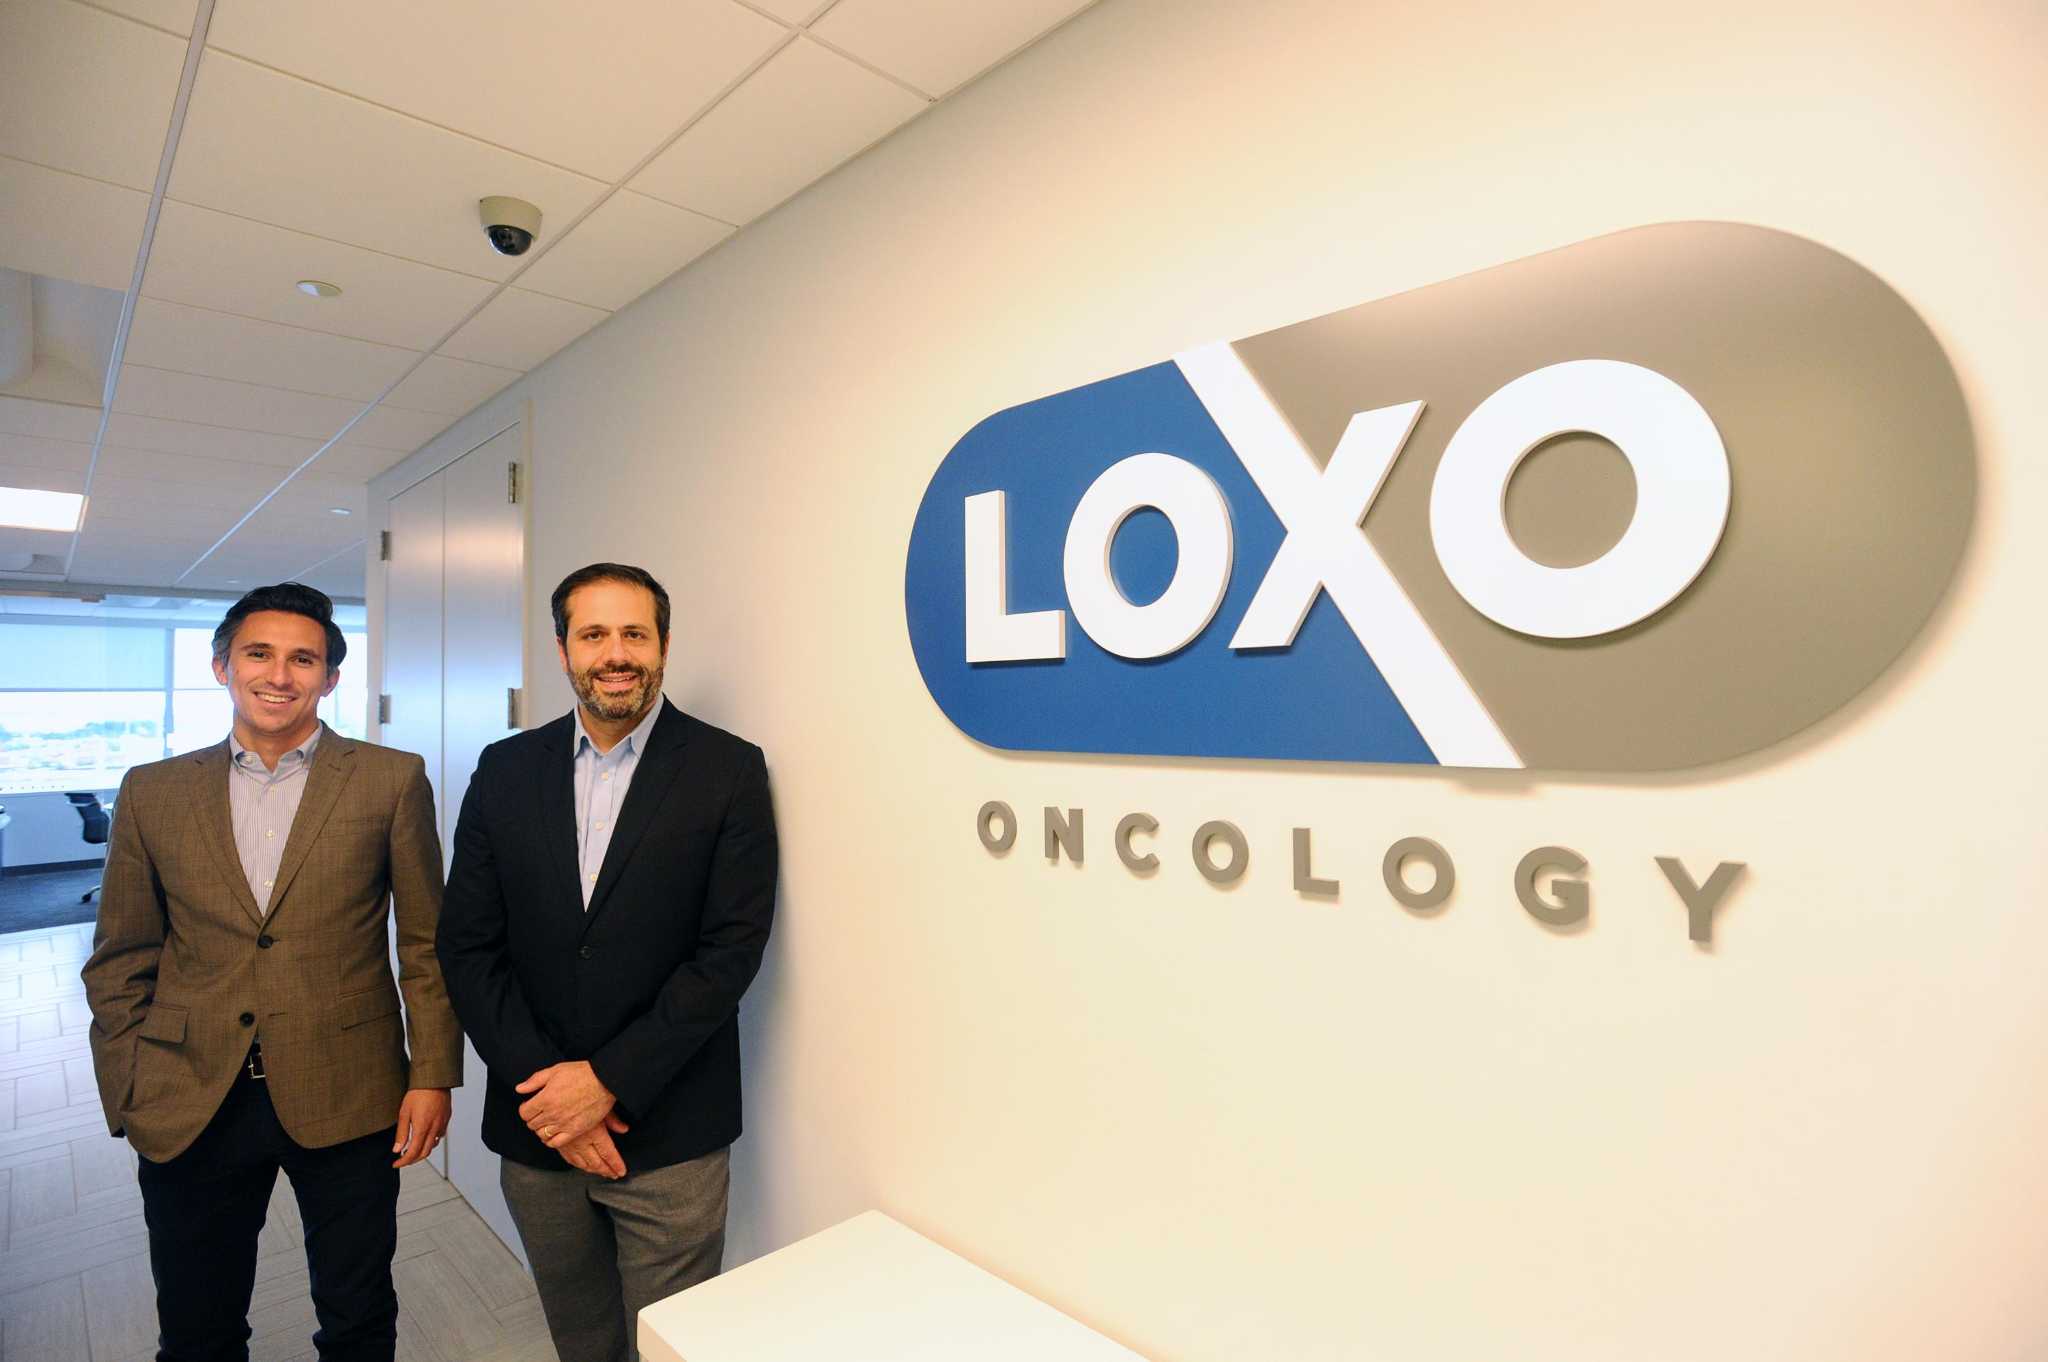 Loxo Oncology announces billion-dollar deal with Bayer - StamfordAdvocate